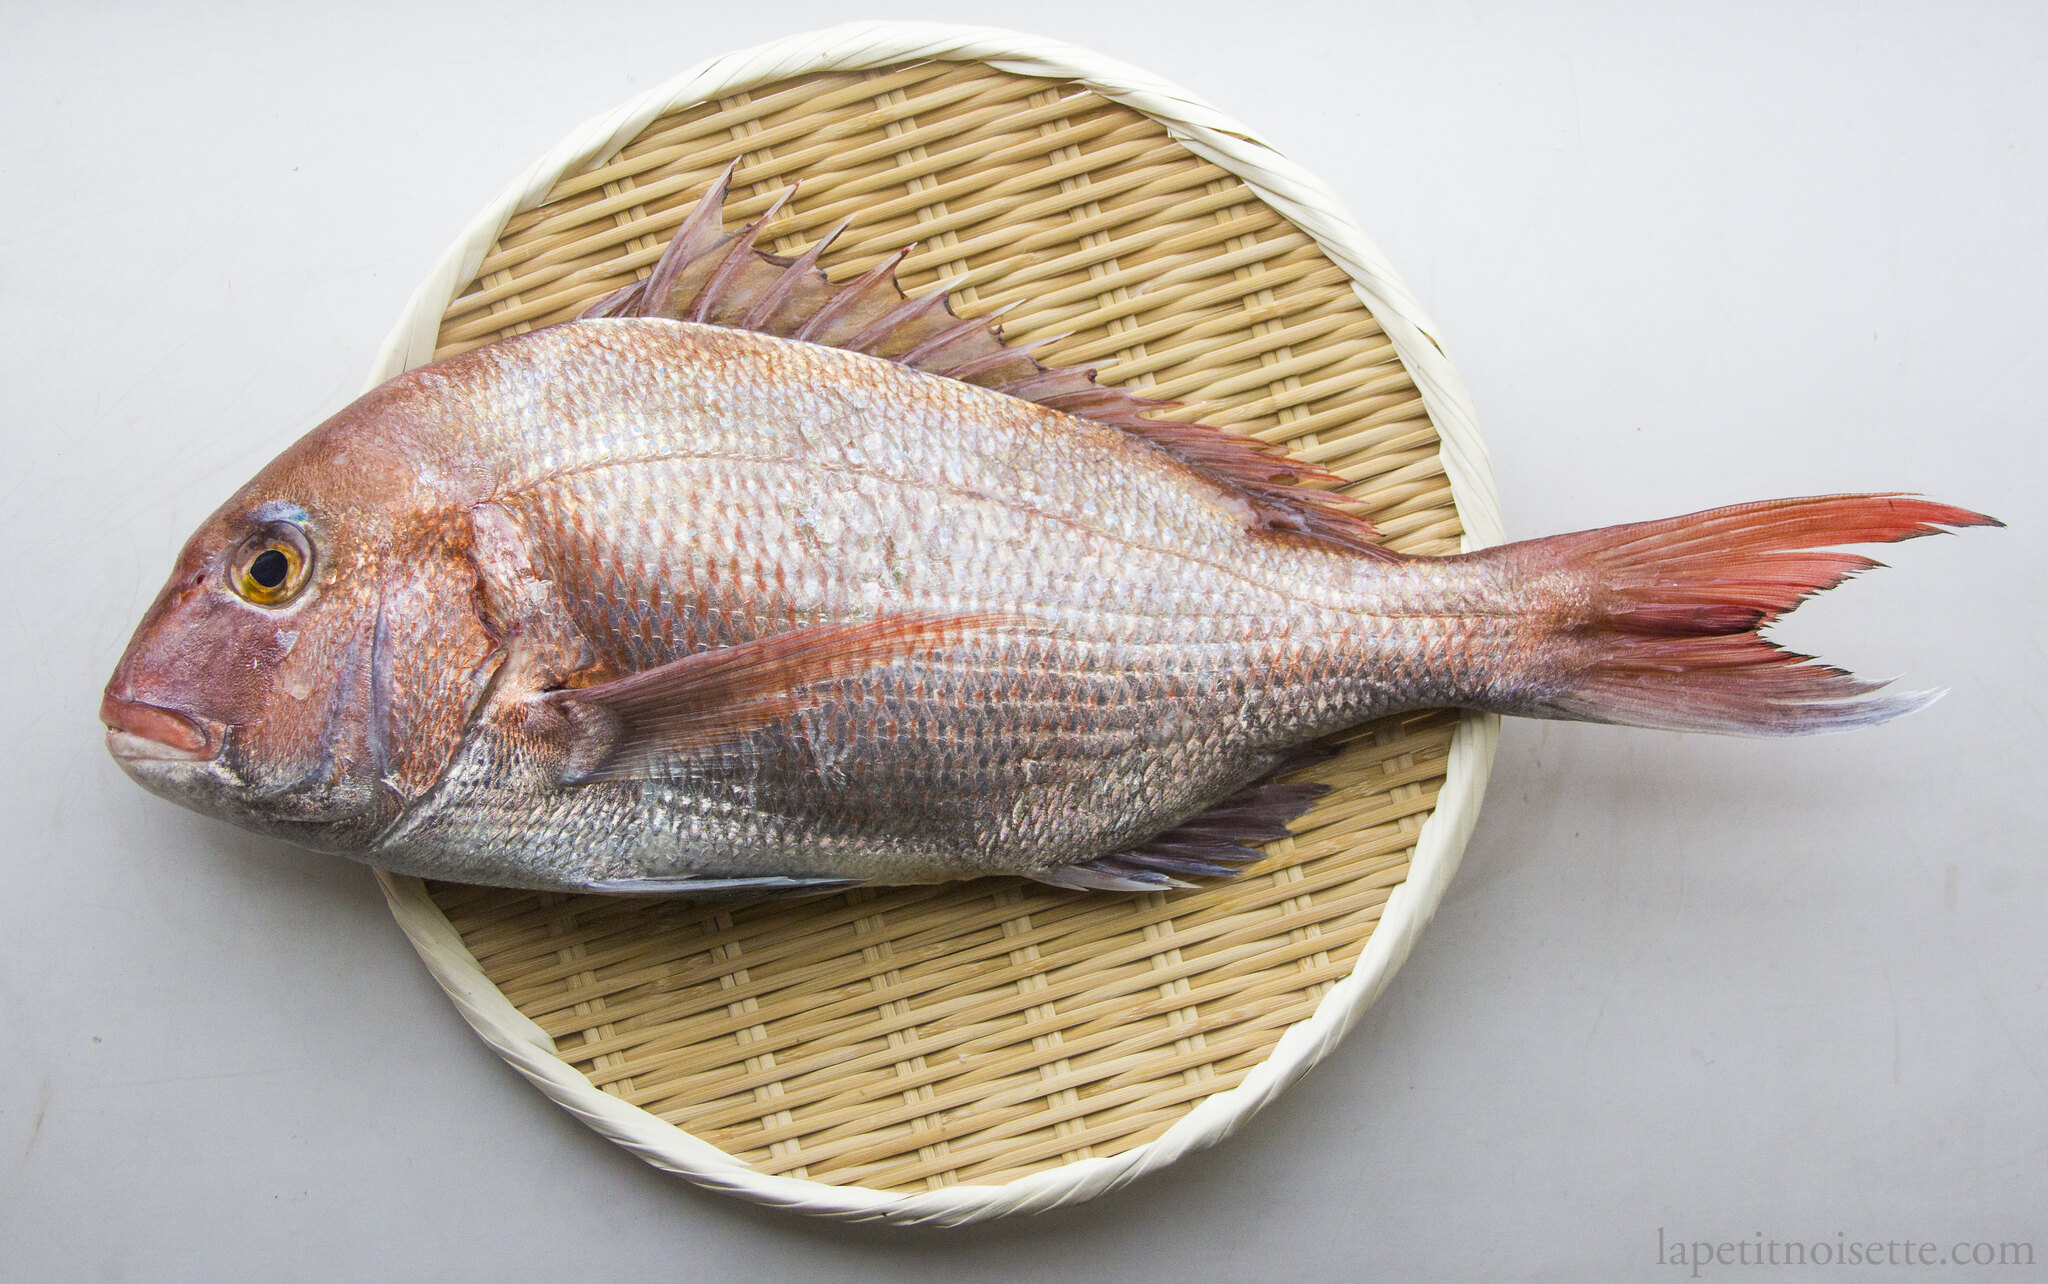 A high quality Japanese sea bream for sushi.